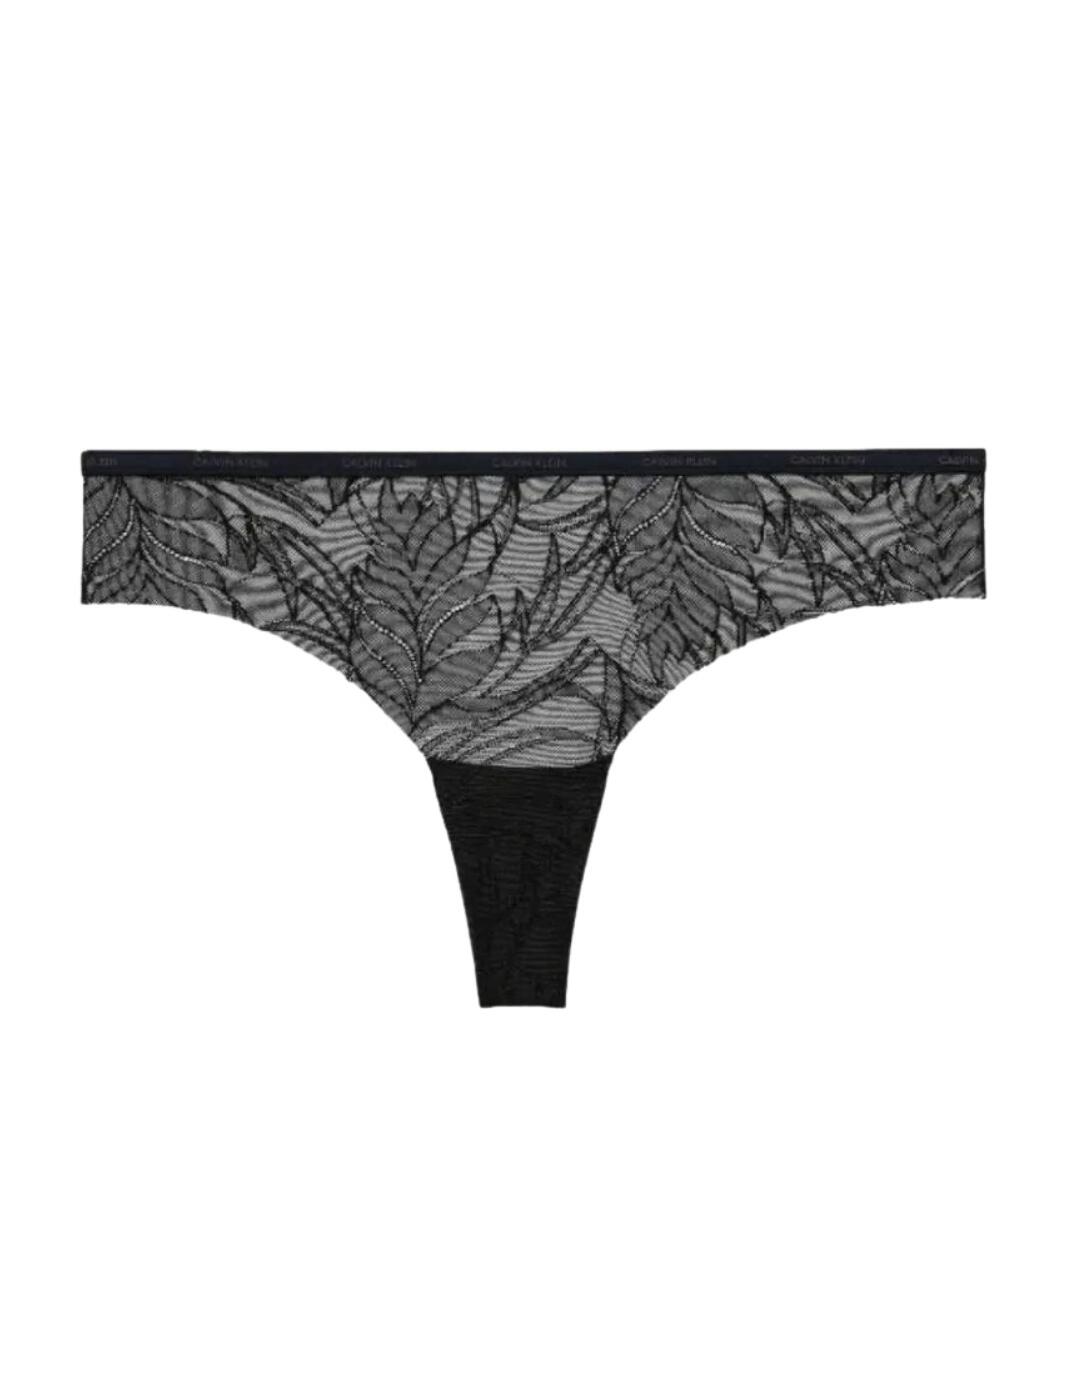 Calvin Klein Underwear Sheer Marquisette Lace Unlined Triangle